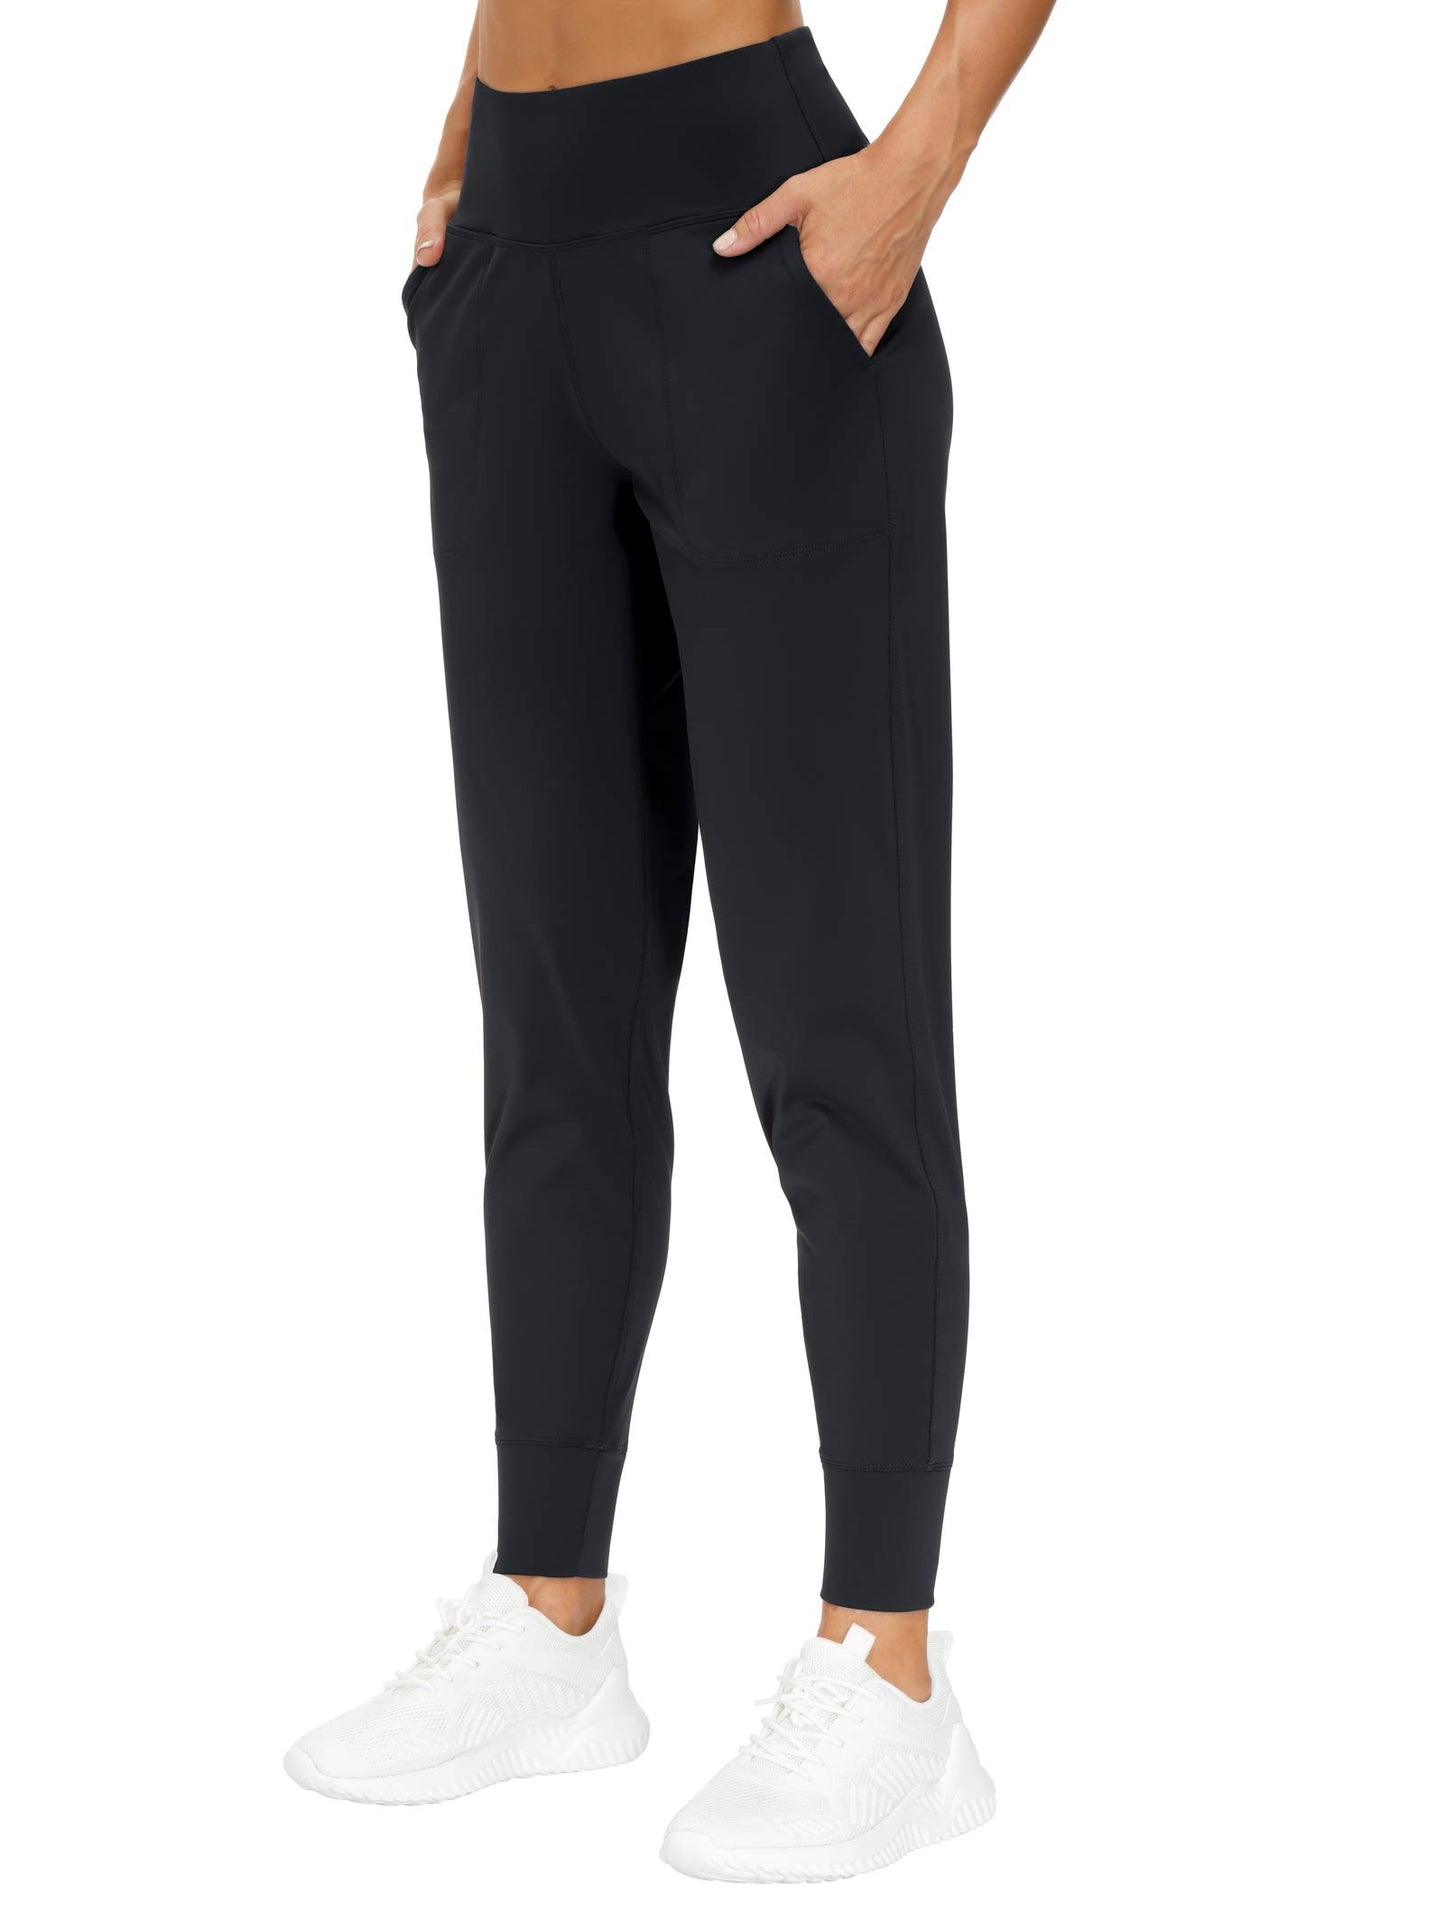 THE GYM PEOPLE Womens Joggers Pants with Pockets Athletic Leggings Tapered Lounge Pants for Workout, Yoga, Running, Training (Medium, Black)